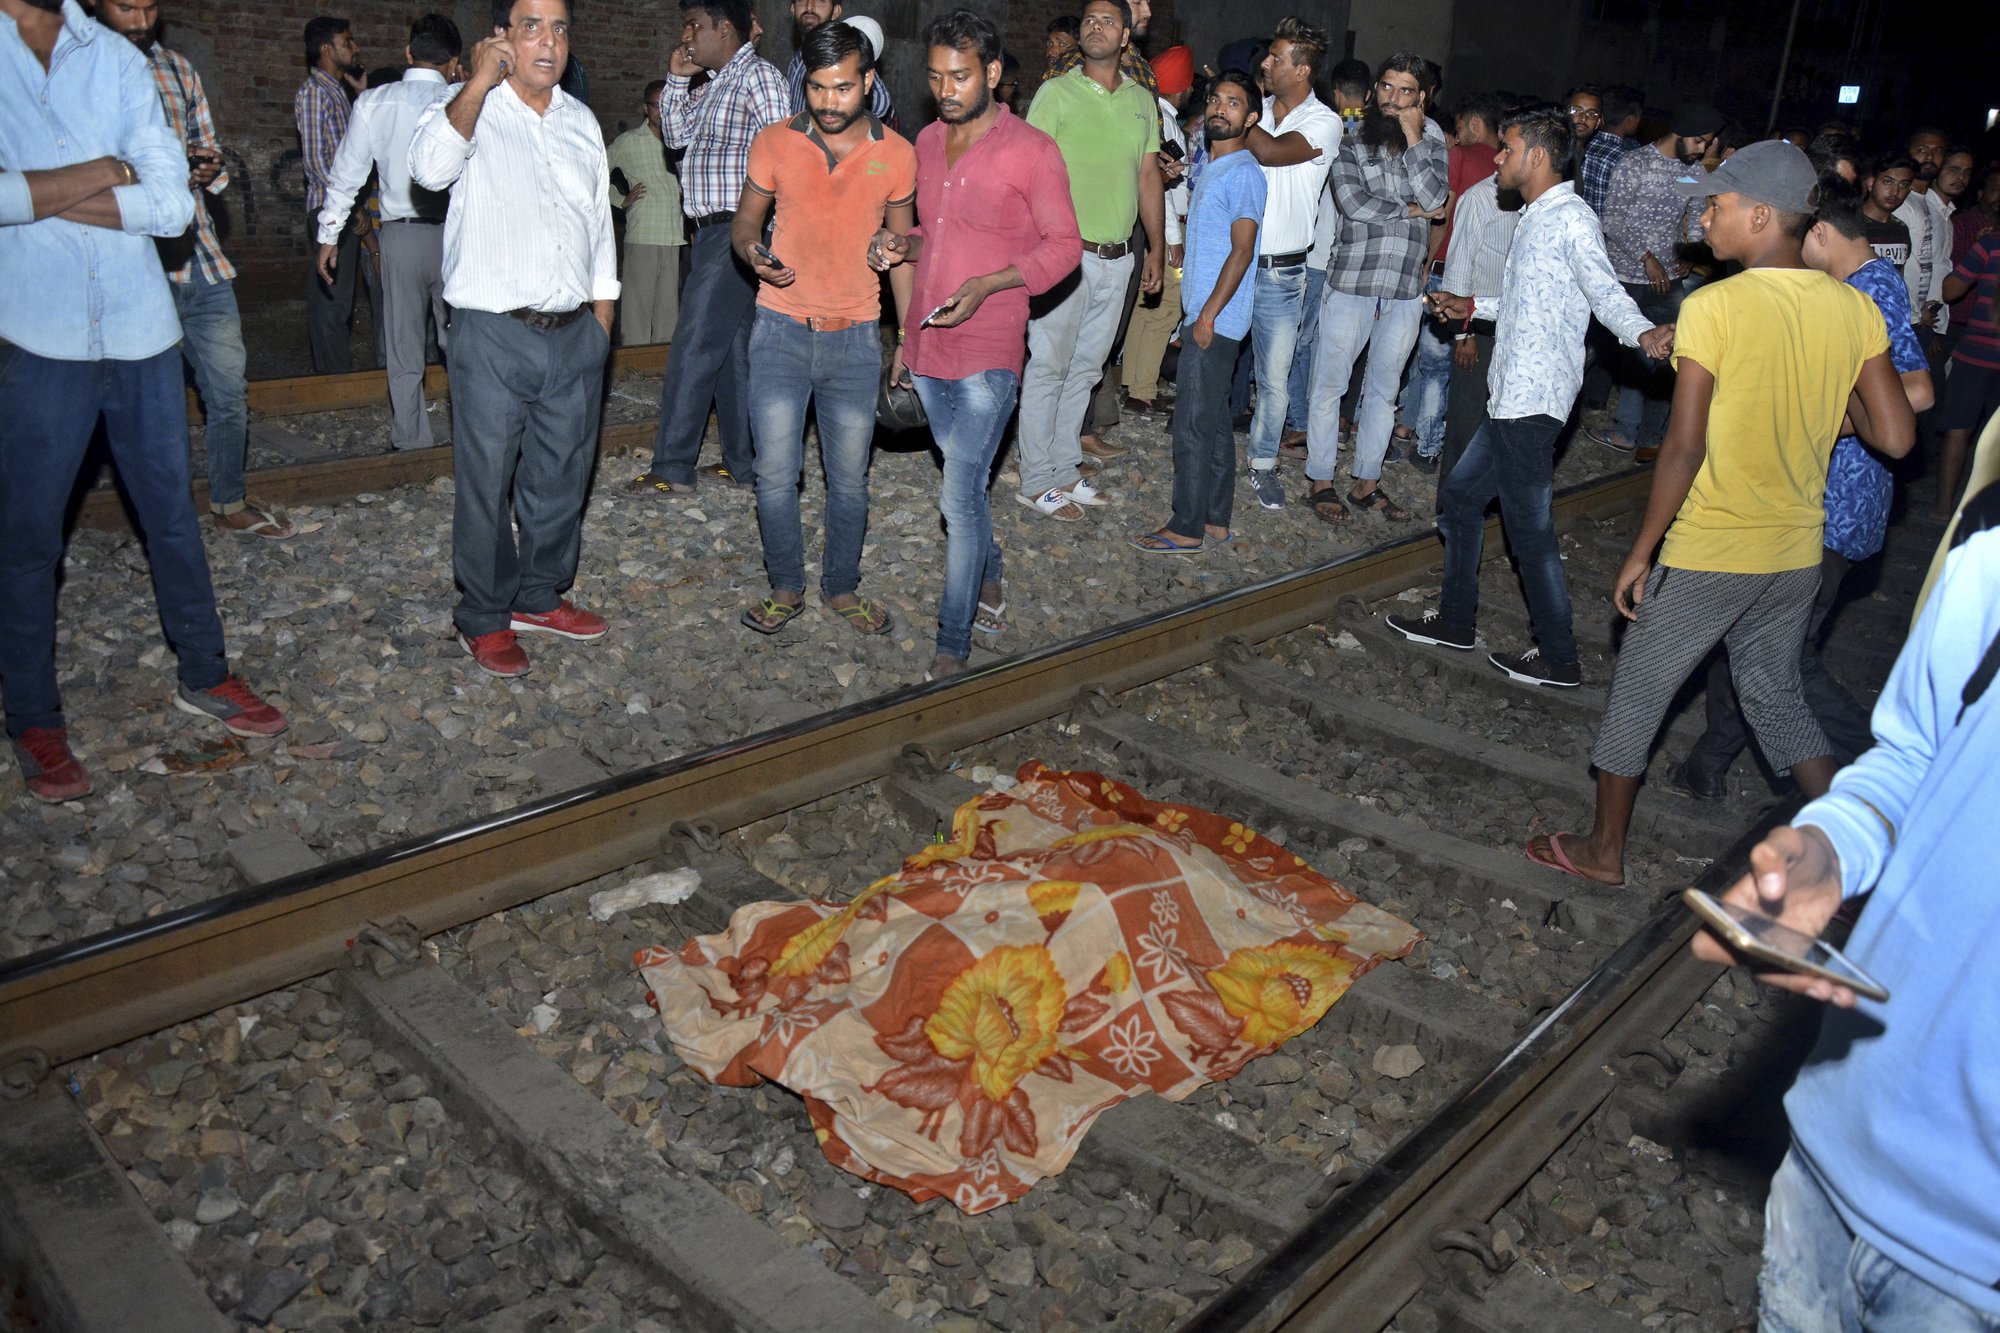 The body of a victim of a train accident lies covered in cloth on a railway track in Amritsar, India, on Friday, Oct. 19, 2018. Photo: AP